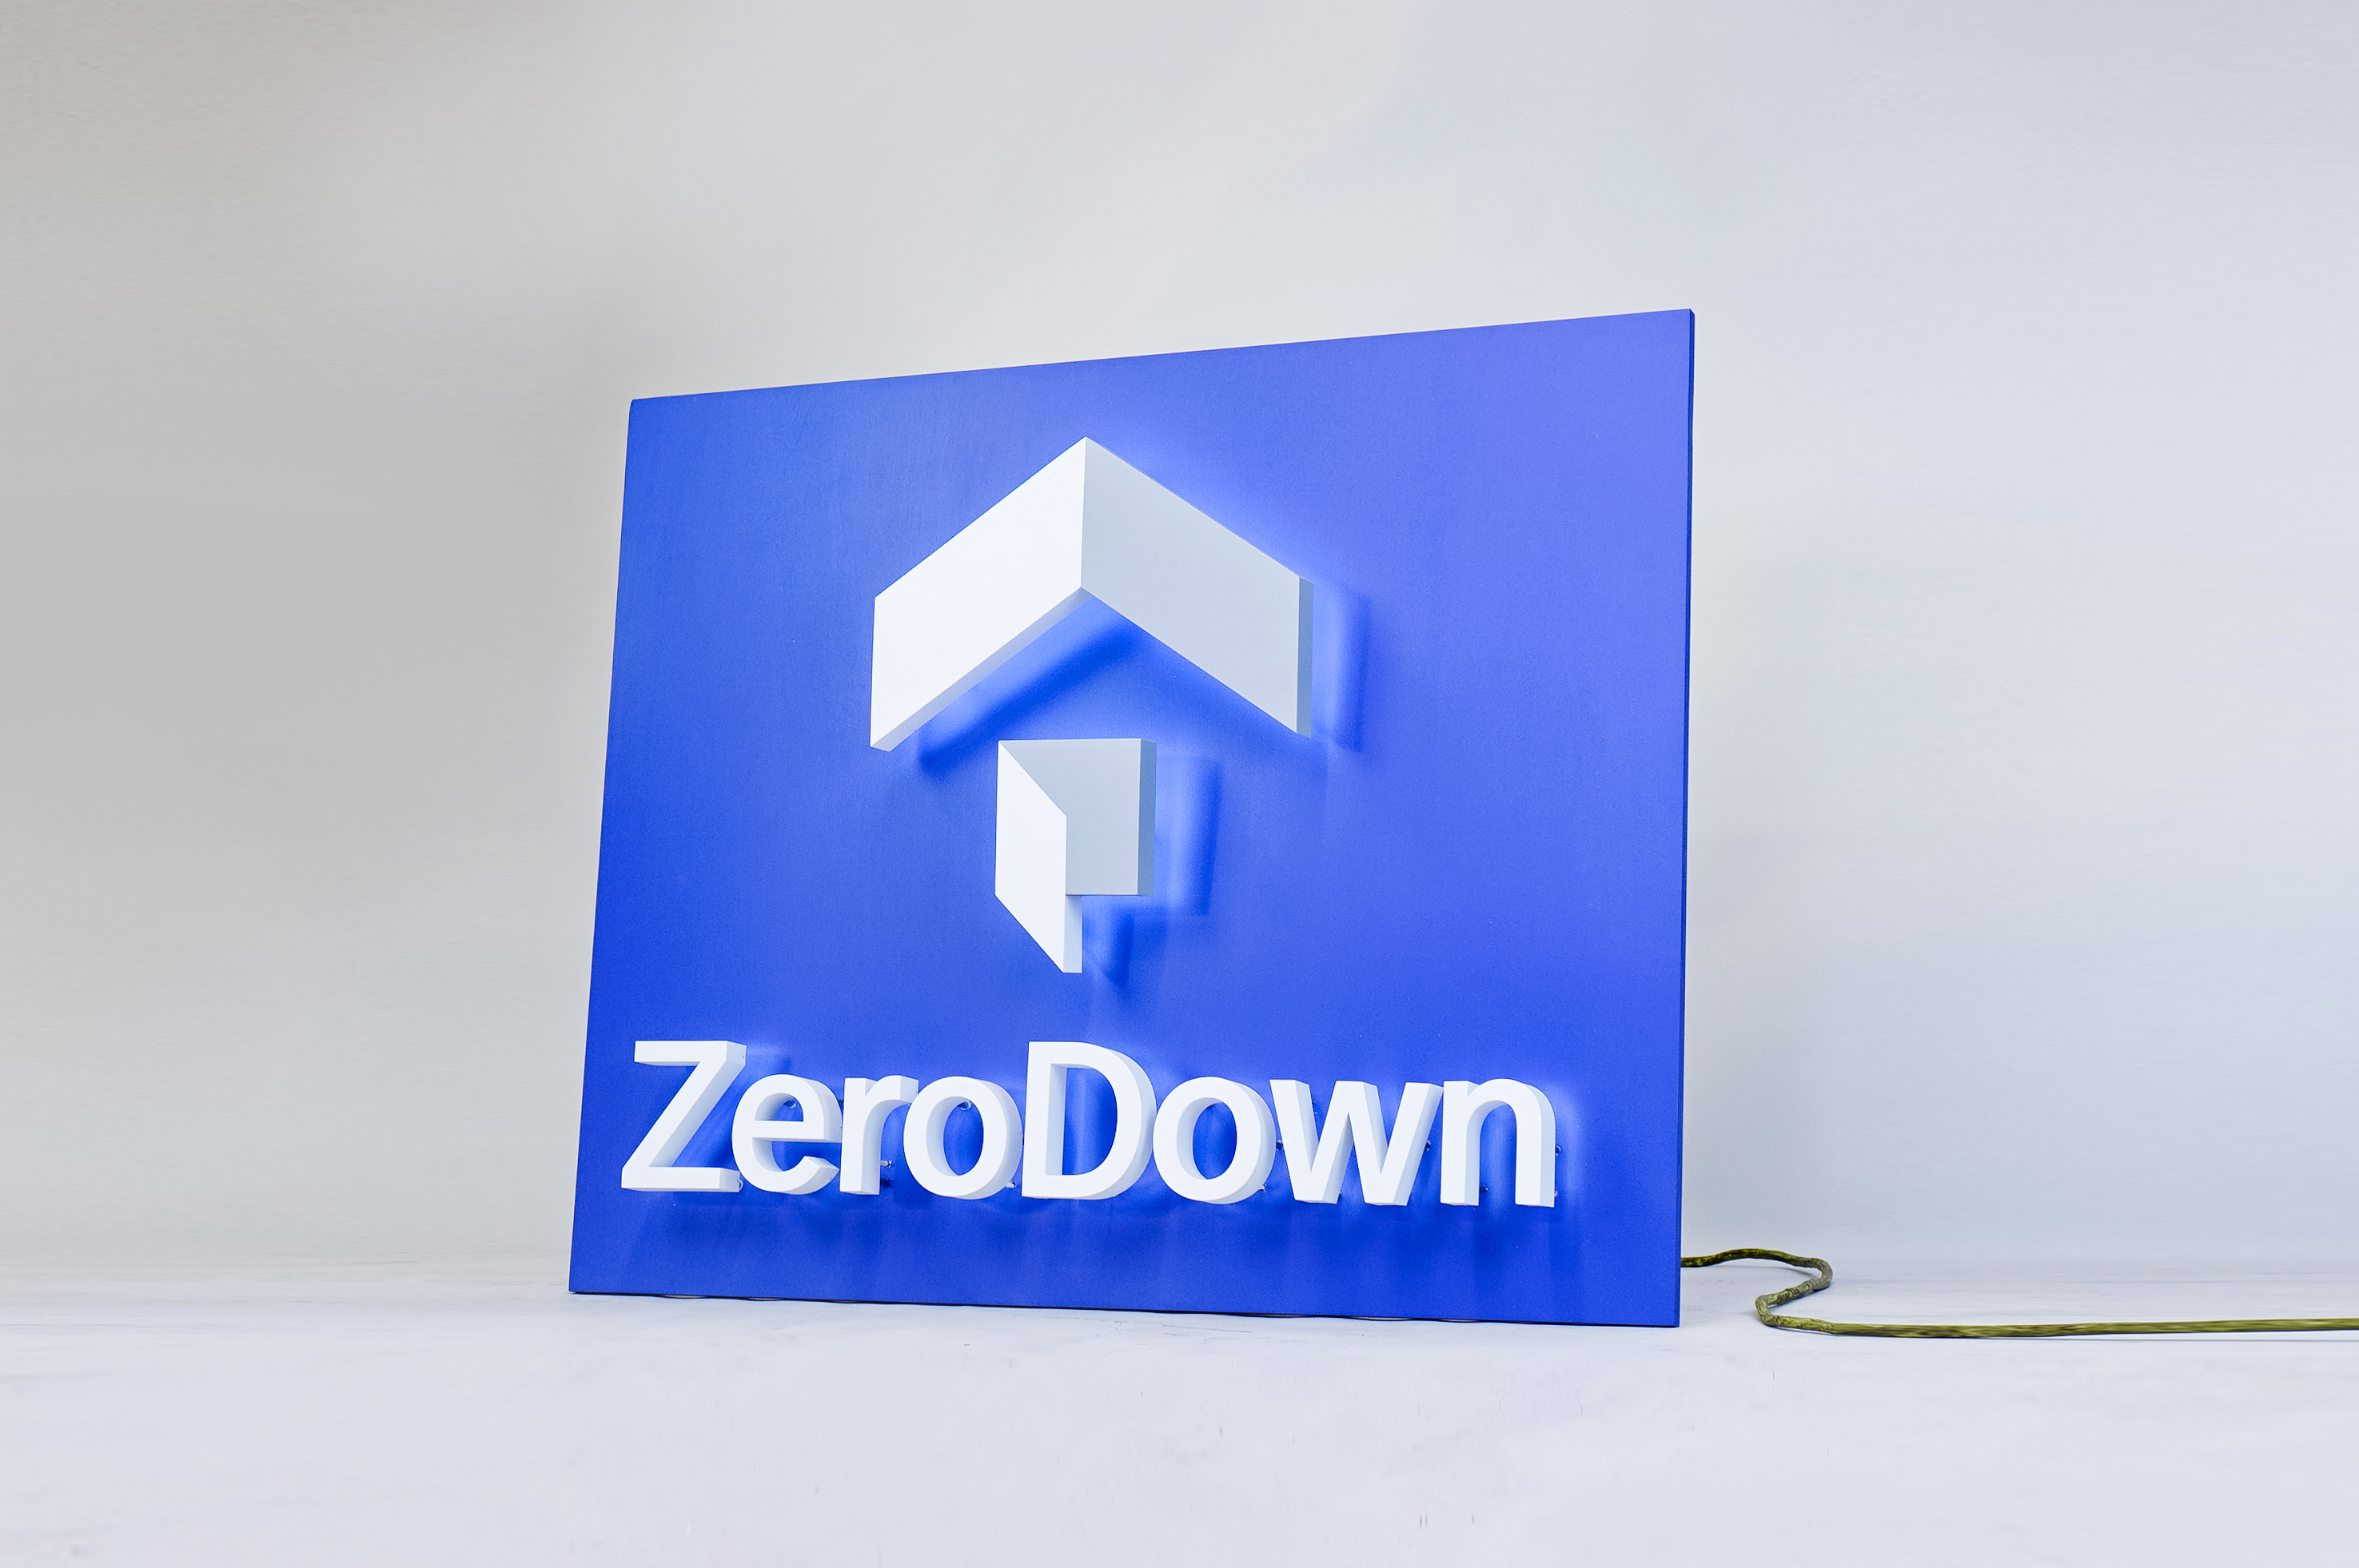 Back-lit, illuminated blue and white lobby sign for Zerodown, a company that couples technology and a debt-fueled real estate fund to allow home-buyers to forgo the traditional down payment process required to purchase a home.